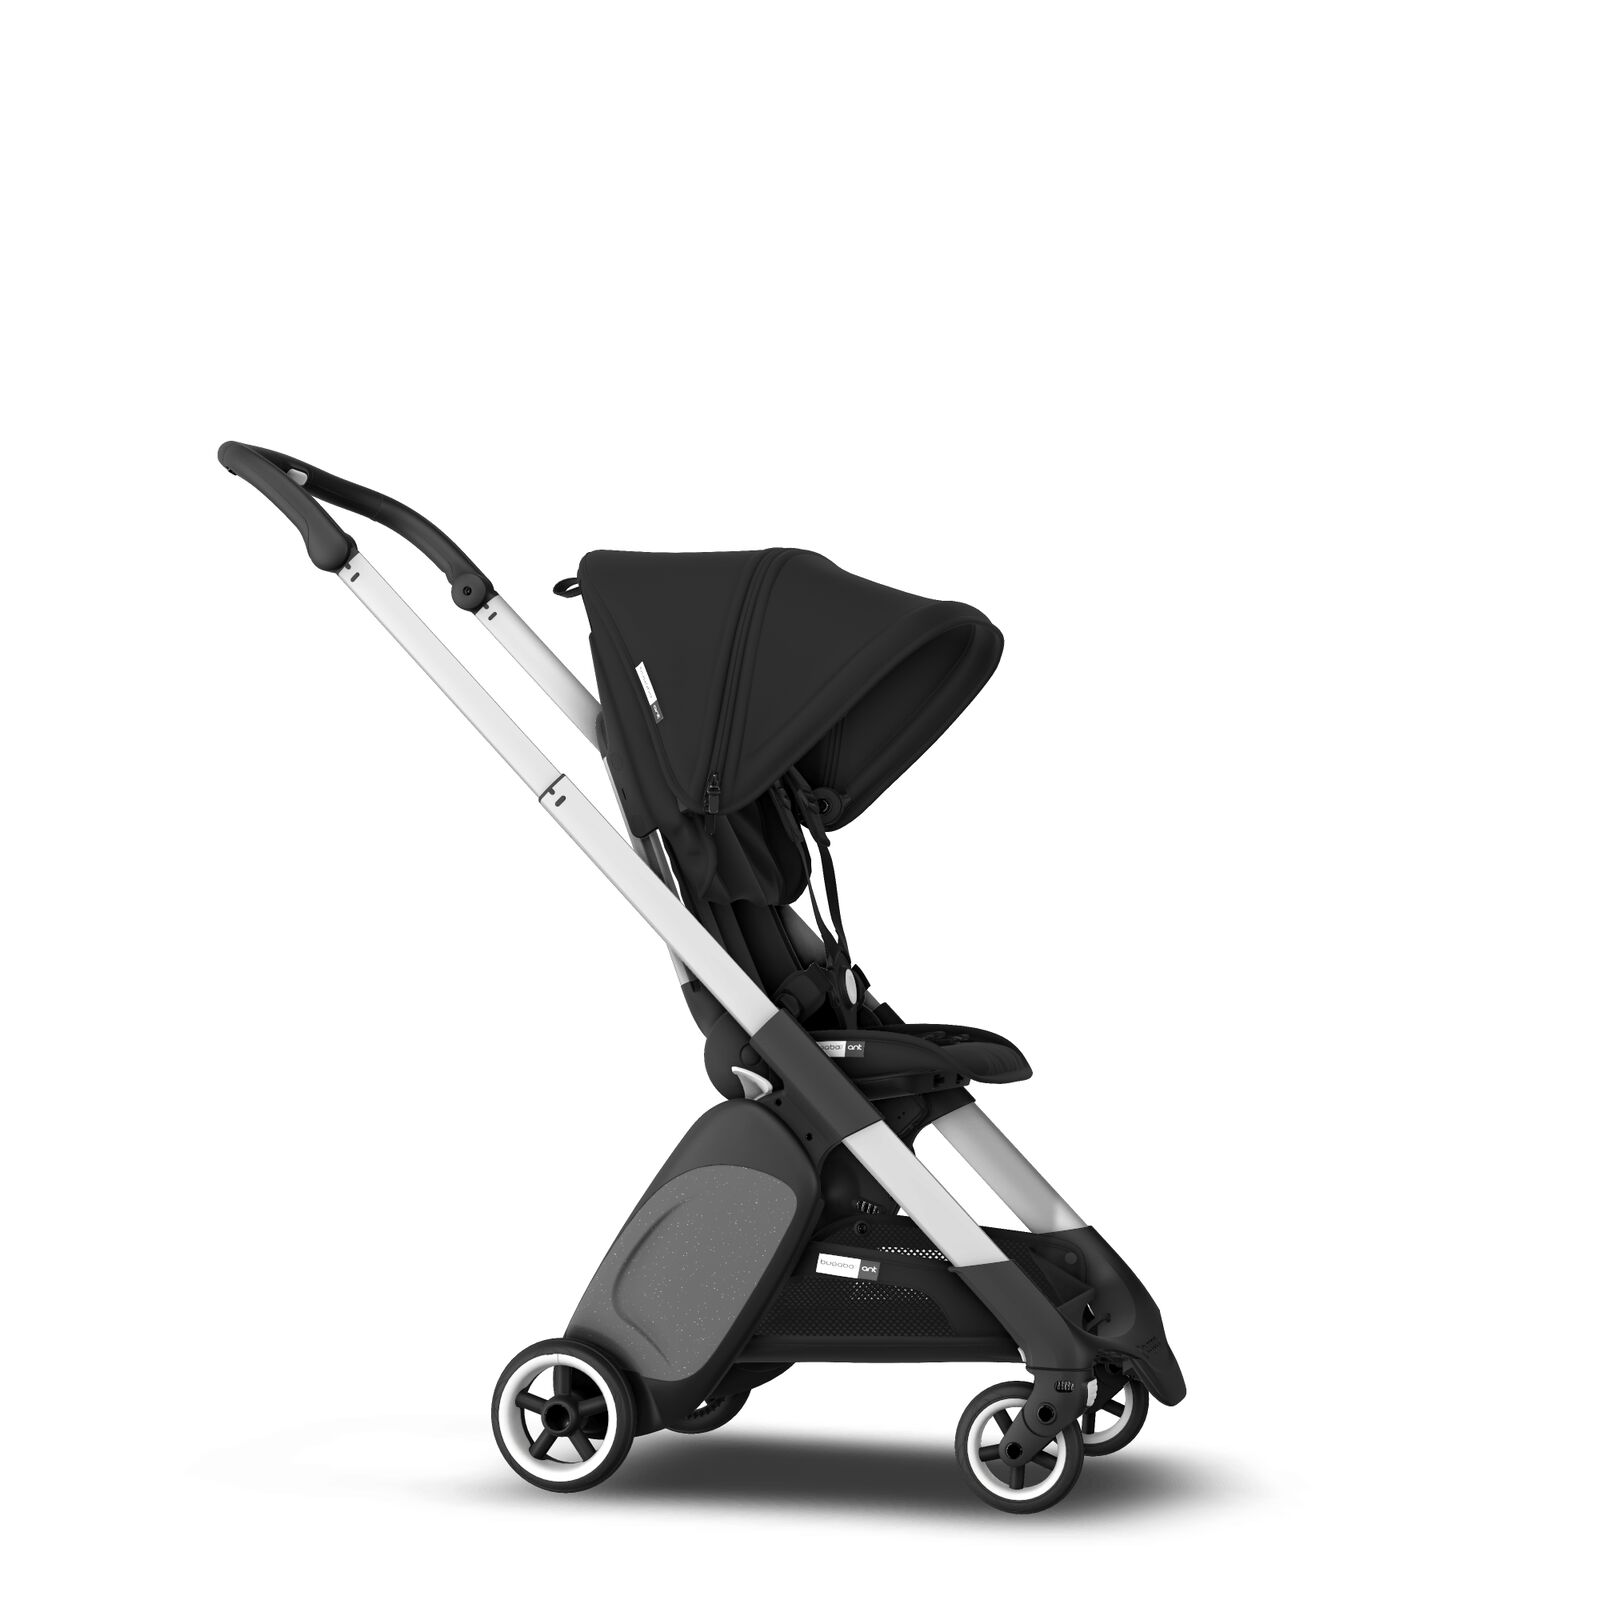 Bugaboo Ant ultra compact stroller - View 4